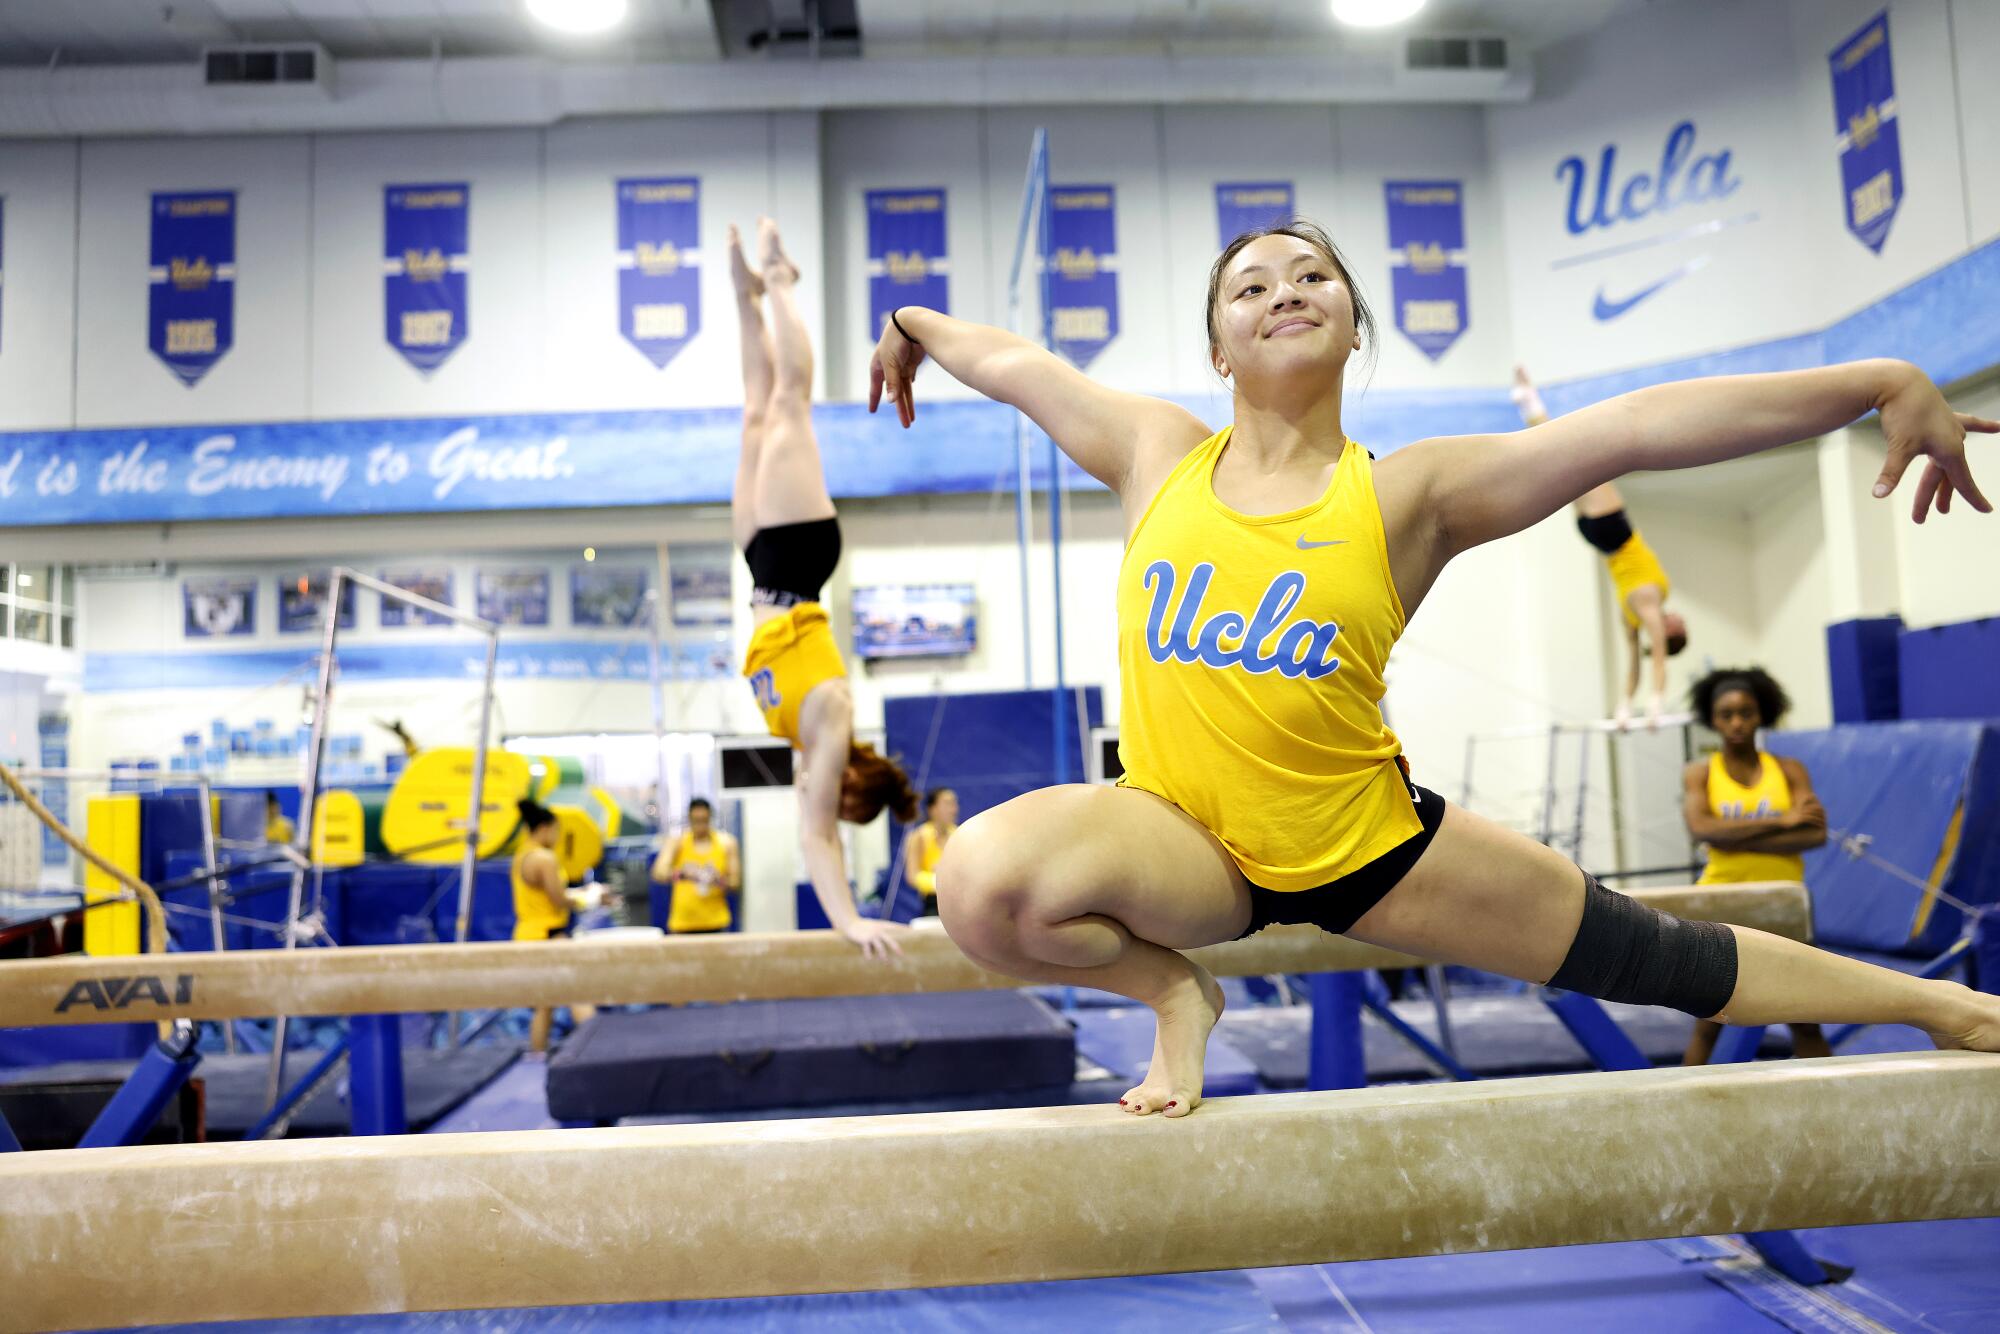 Emma Malabuyo smiles while extending her arms and working out on the beam.